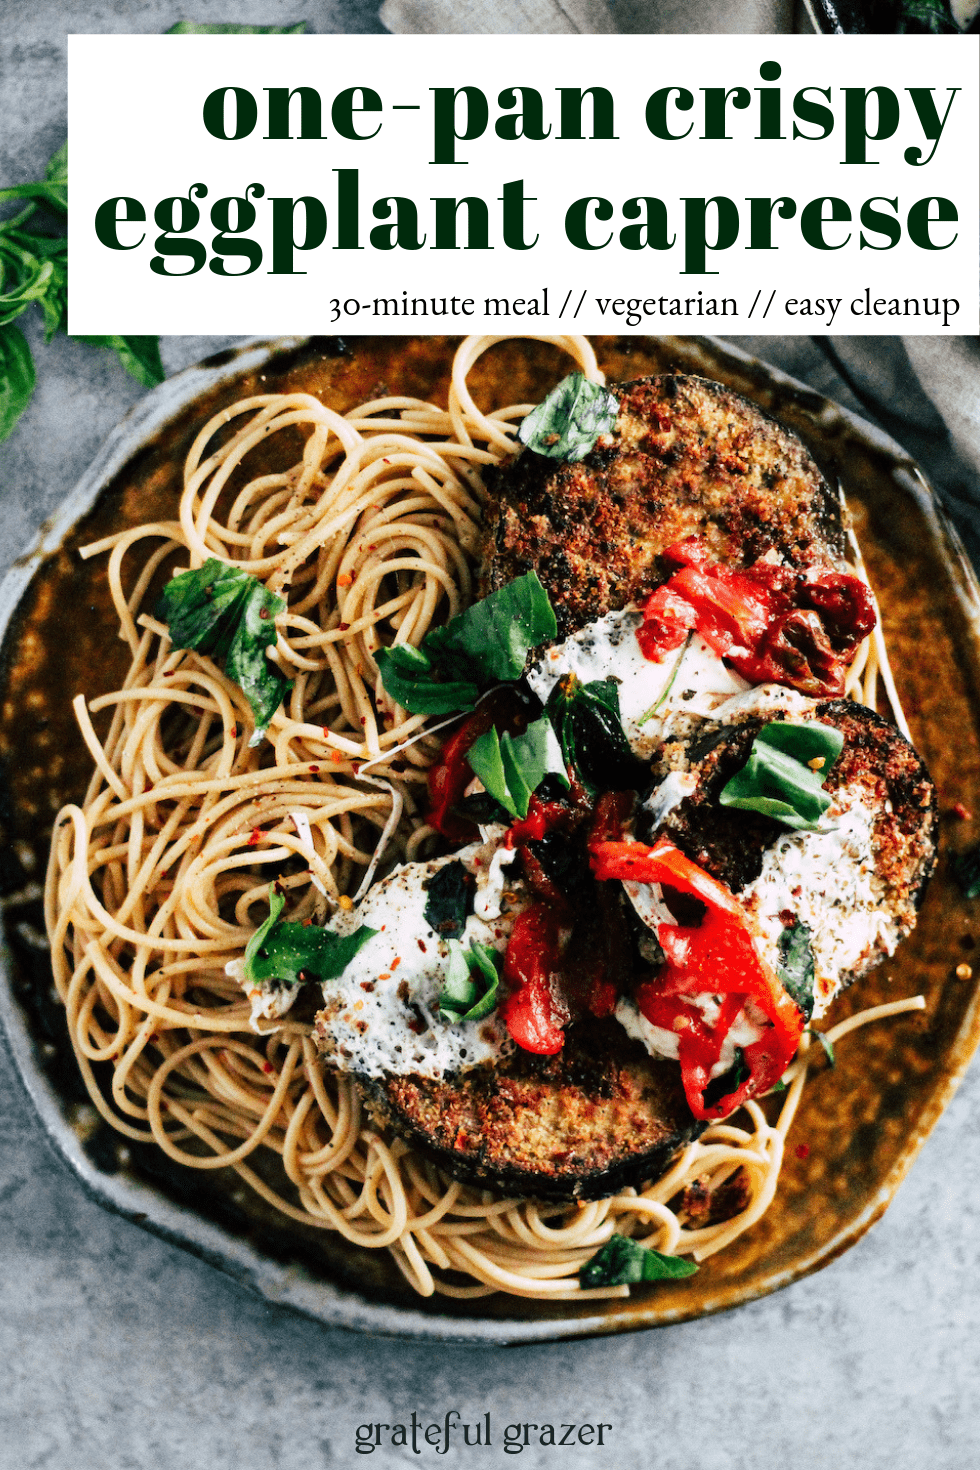 Eggplant with tomato and mozzarella with text that reads, "One-Pan Crispy Eggplant Caprese: 30-minute meal, vegetarian, easy cleanup."